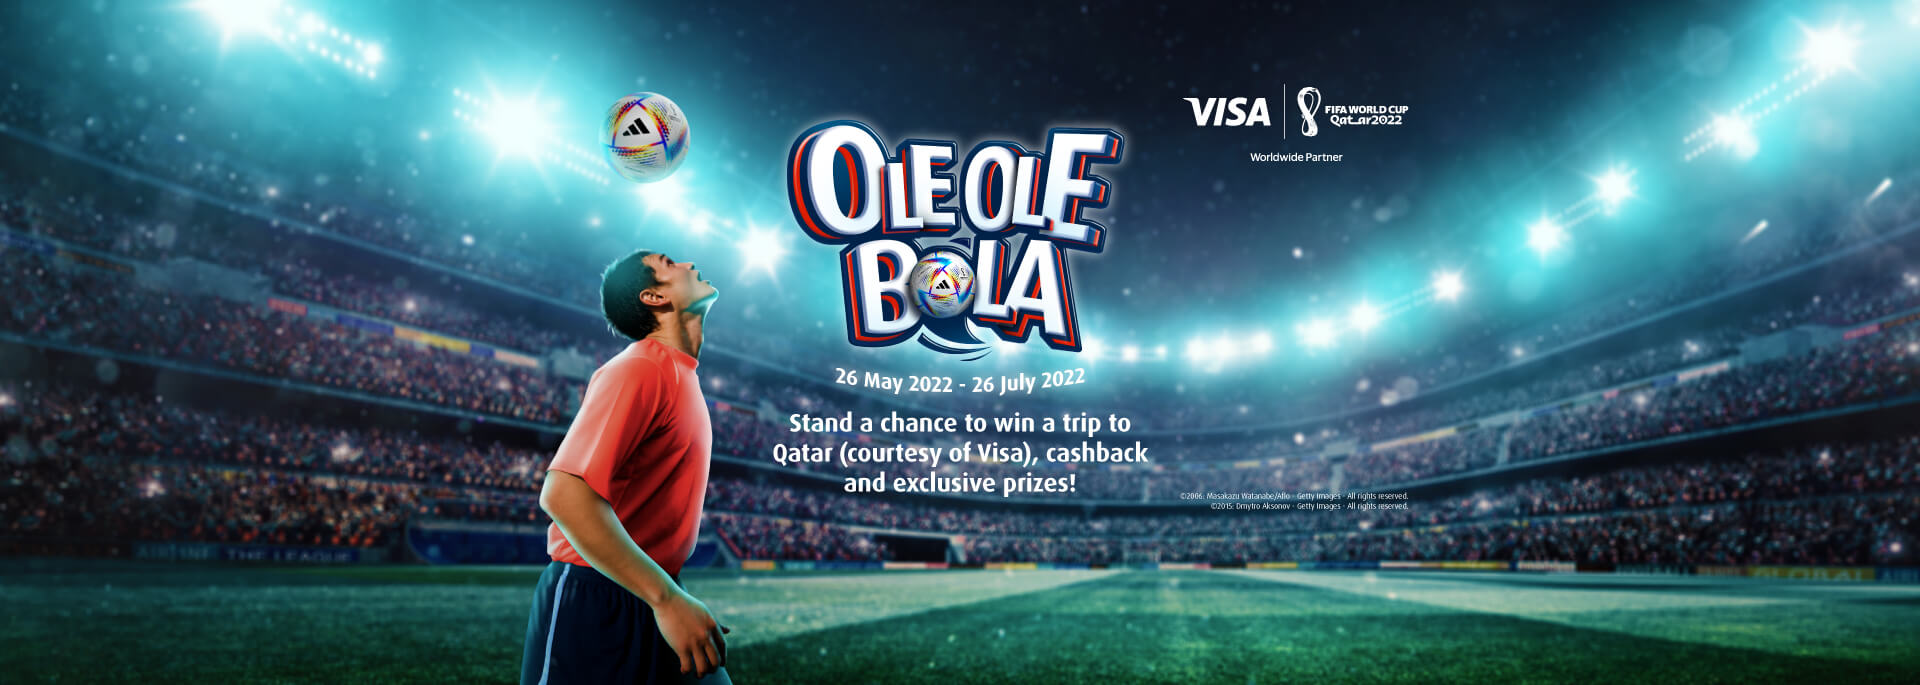 Stand a chance to win a trip to Qatar (courtesy of Visa), cashback and exclusive prizes!